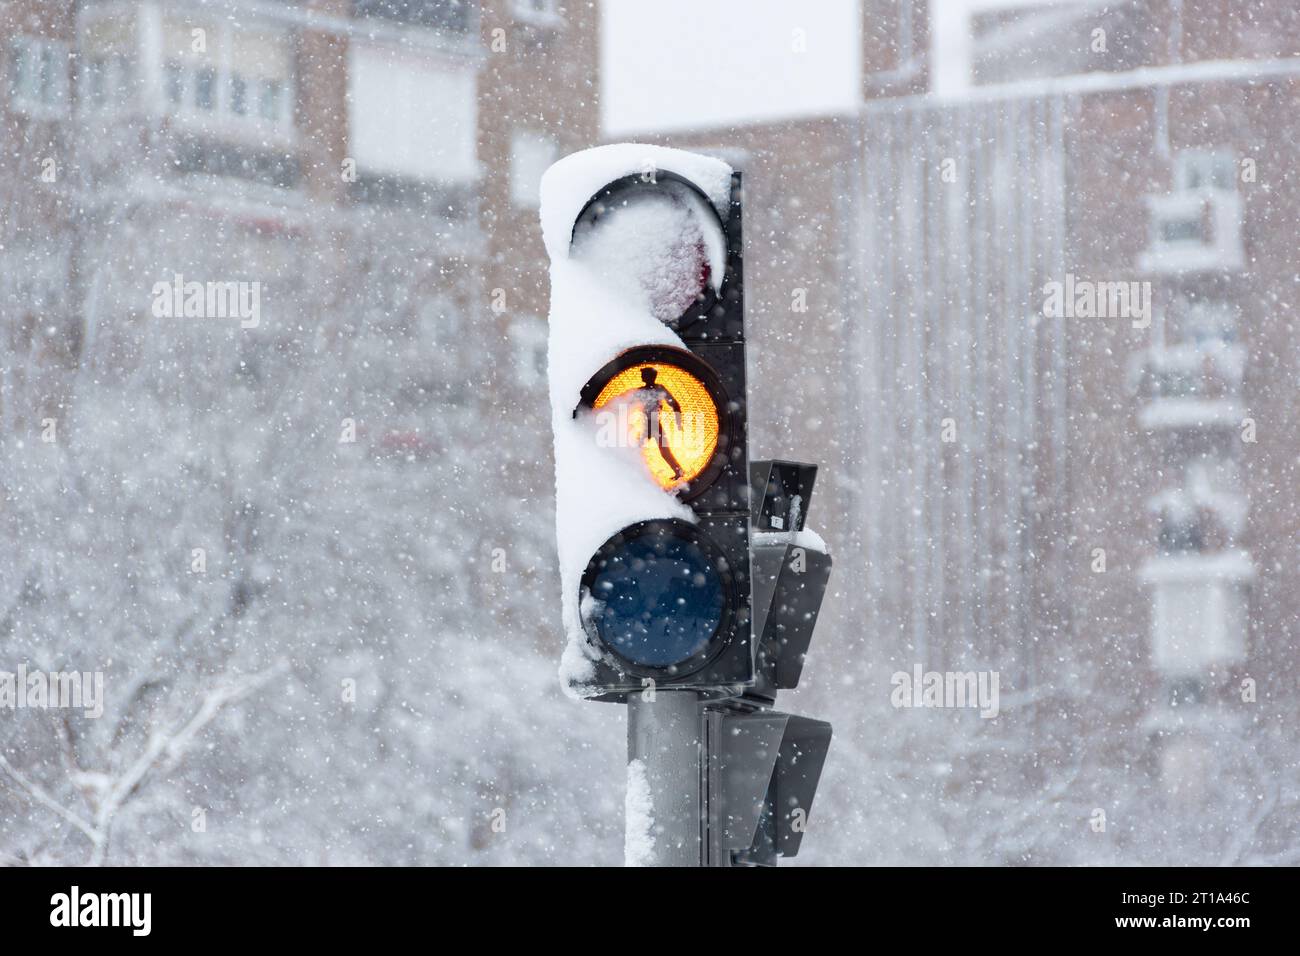 traffic light in a winter day Stock Photo